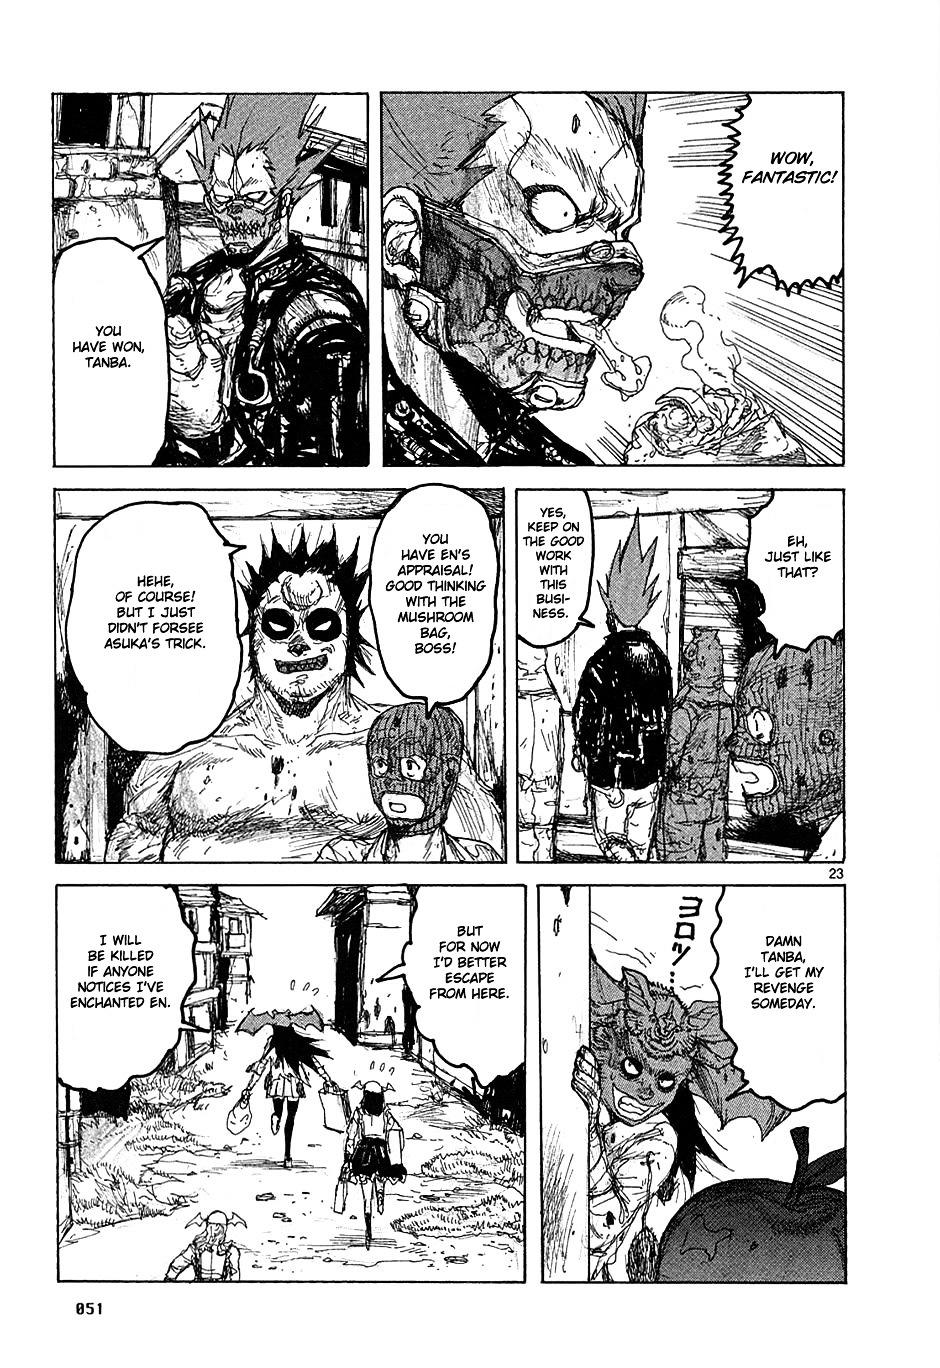 Dorohedoro Chapter 38 : Meatbags Free For All page 23 - Mangakakalot